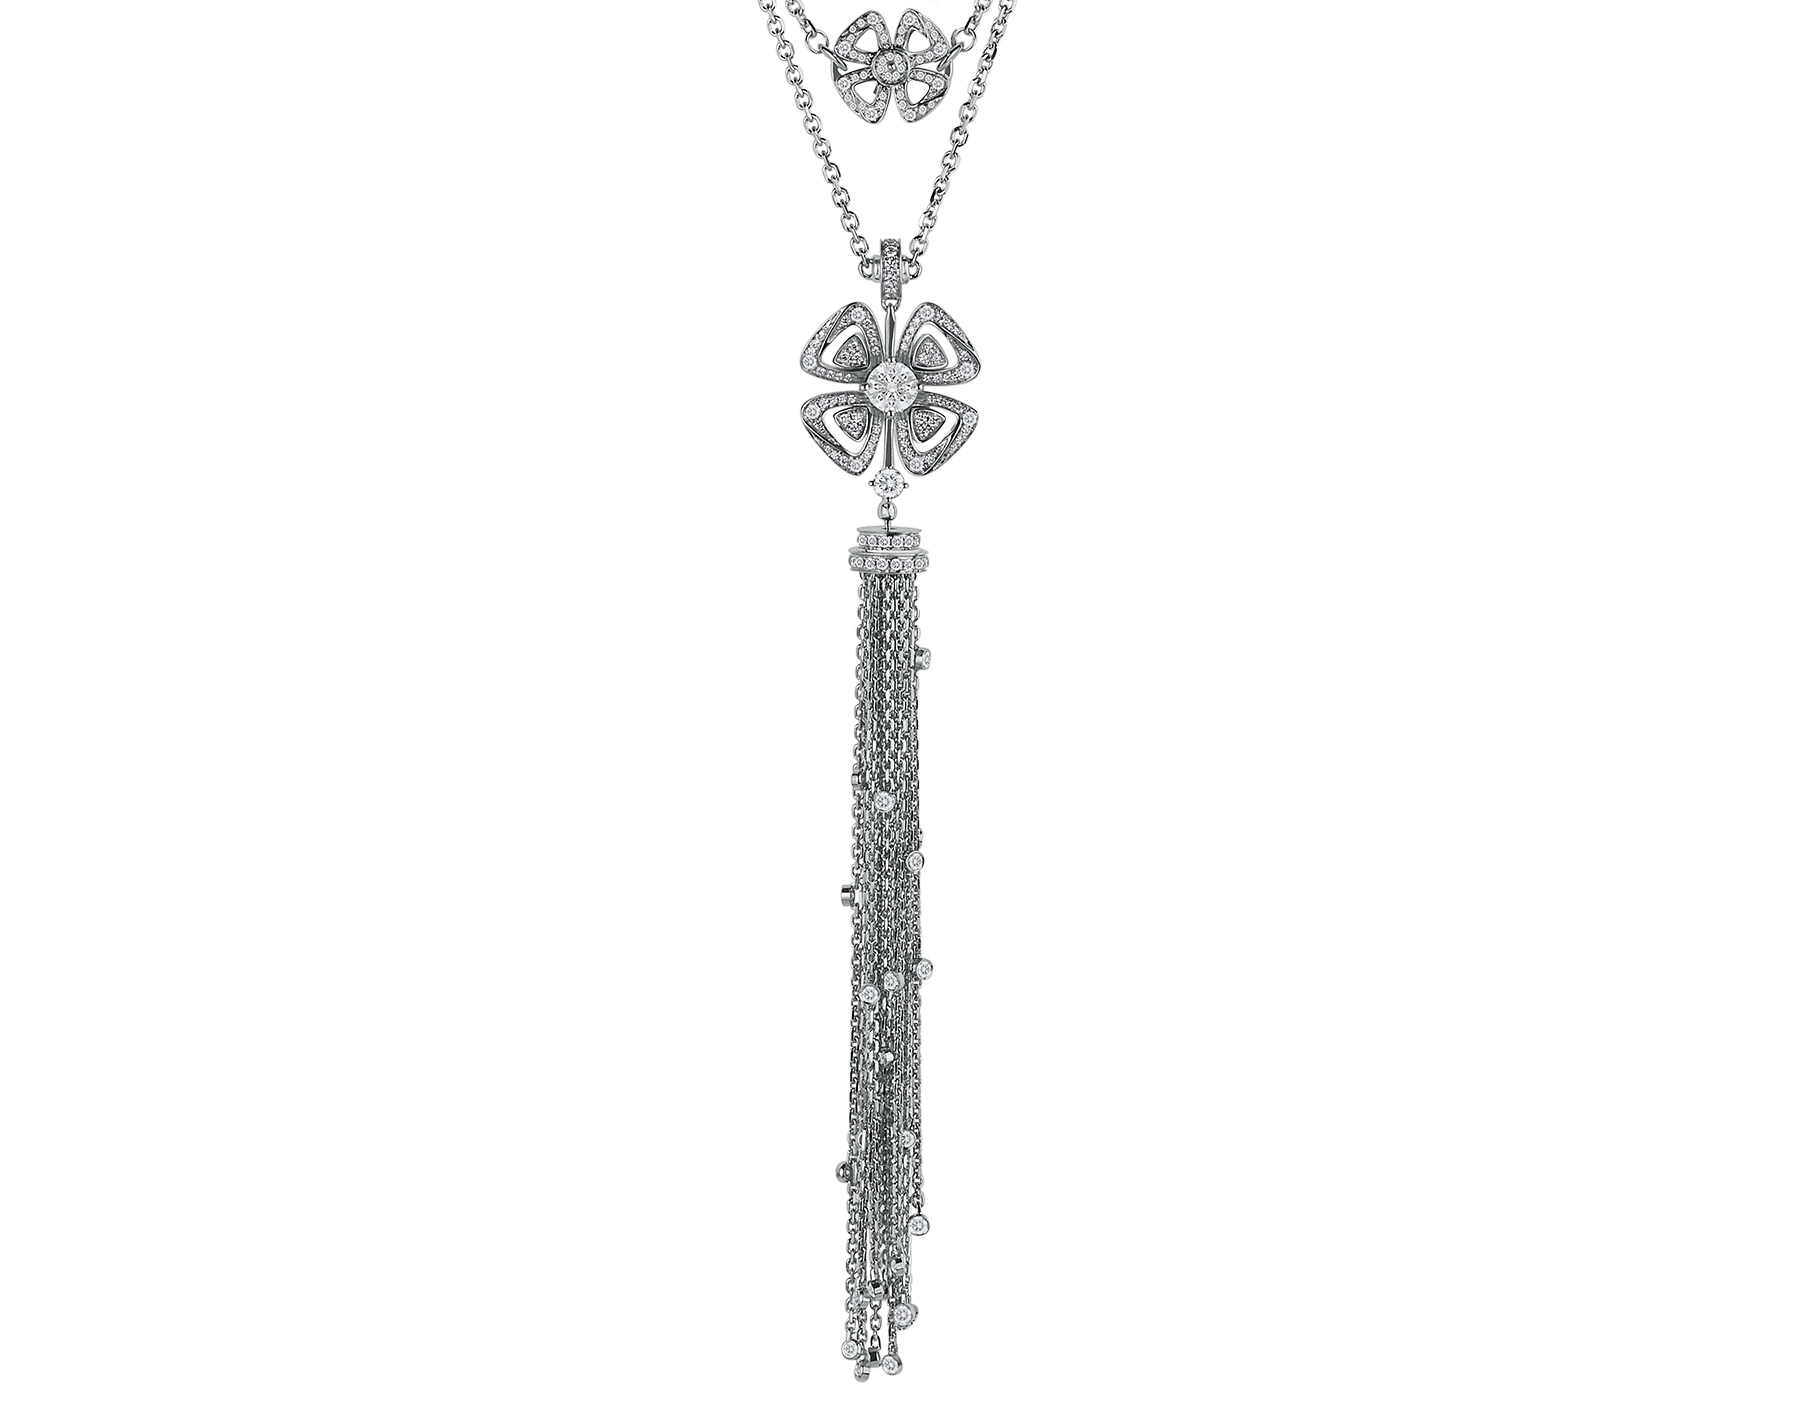 Fiorever 18 kt white gold necklace set with a central diamond and pavé diamonds. 354601 image 1